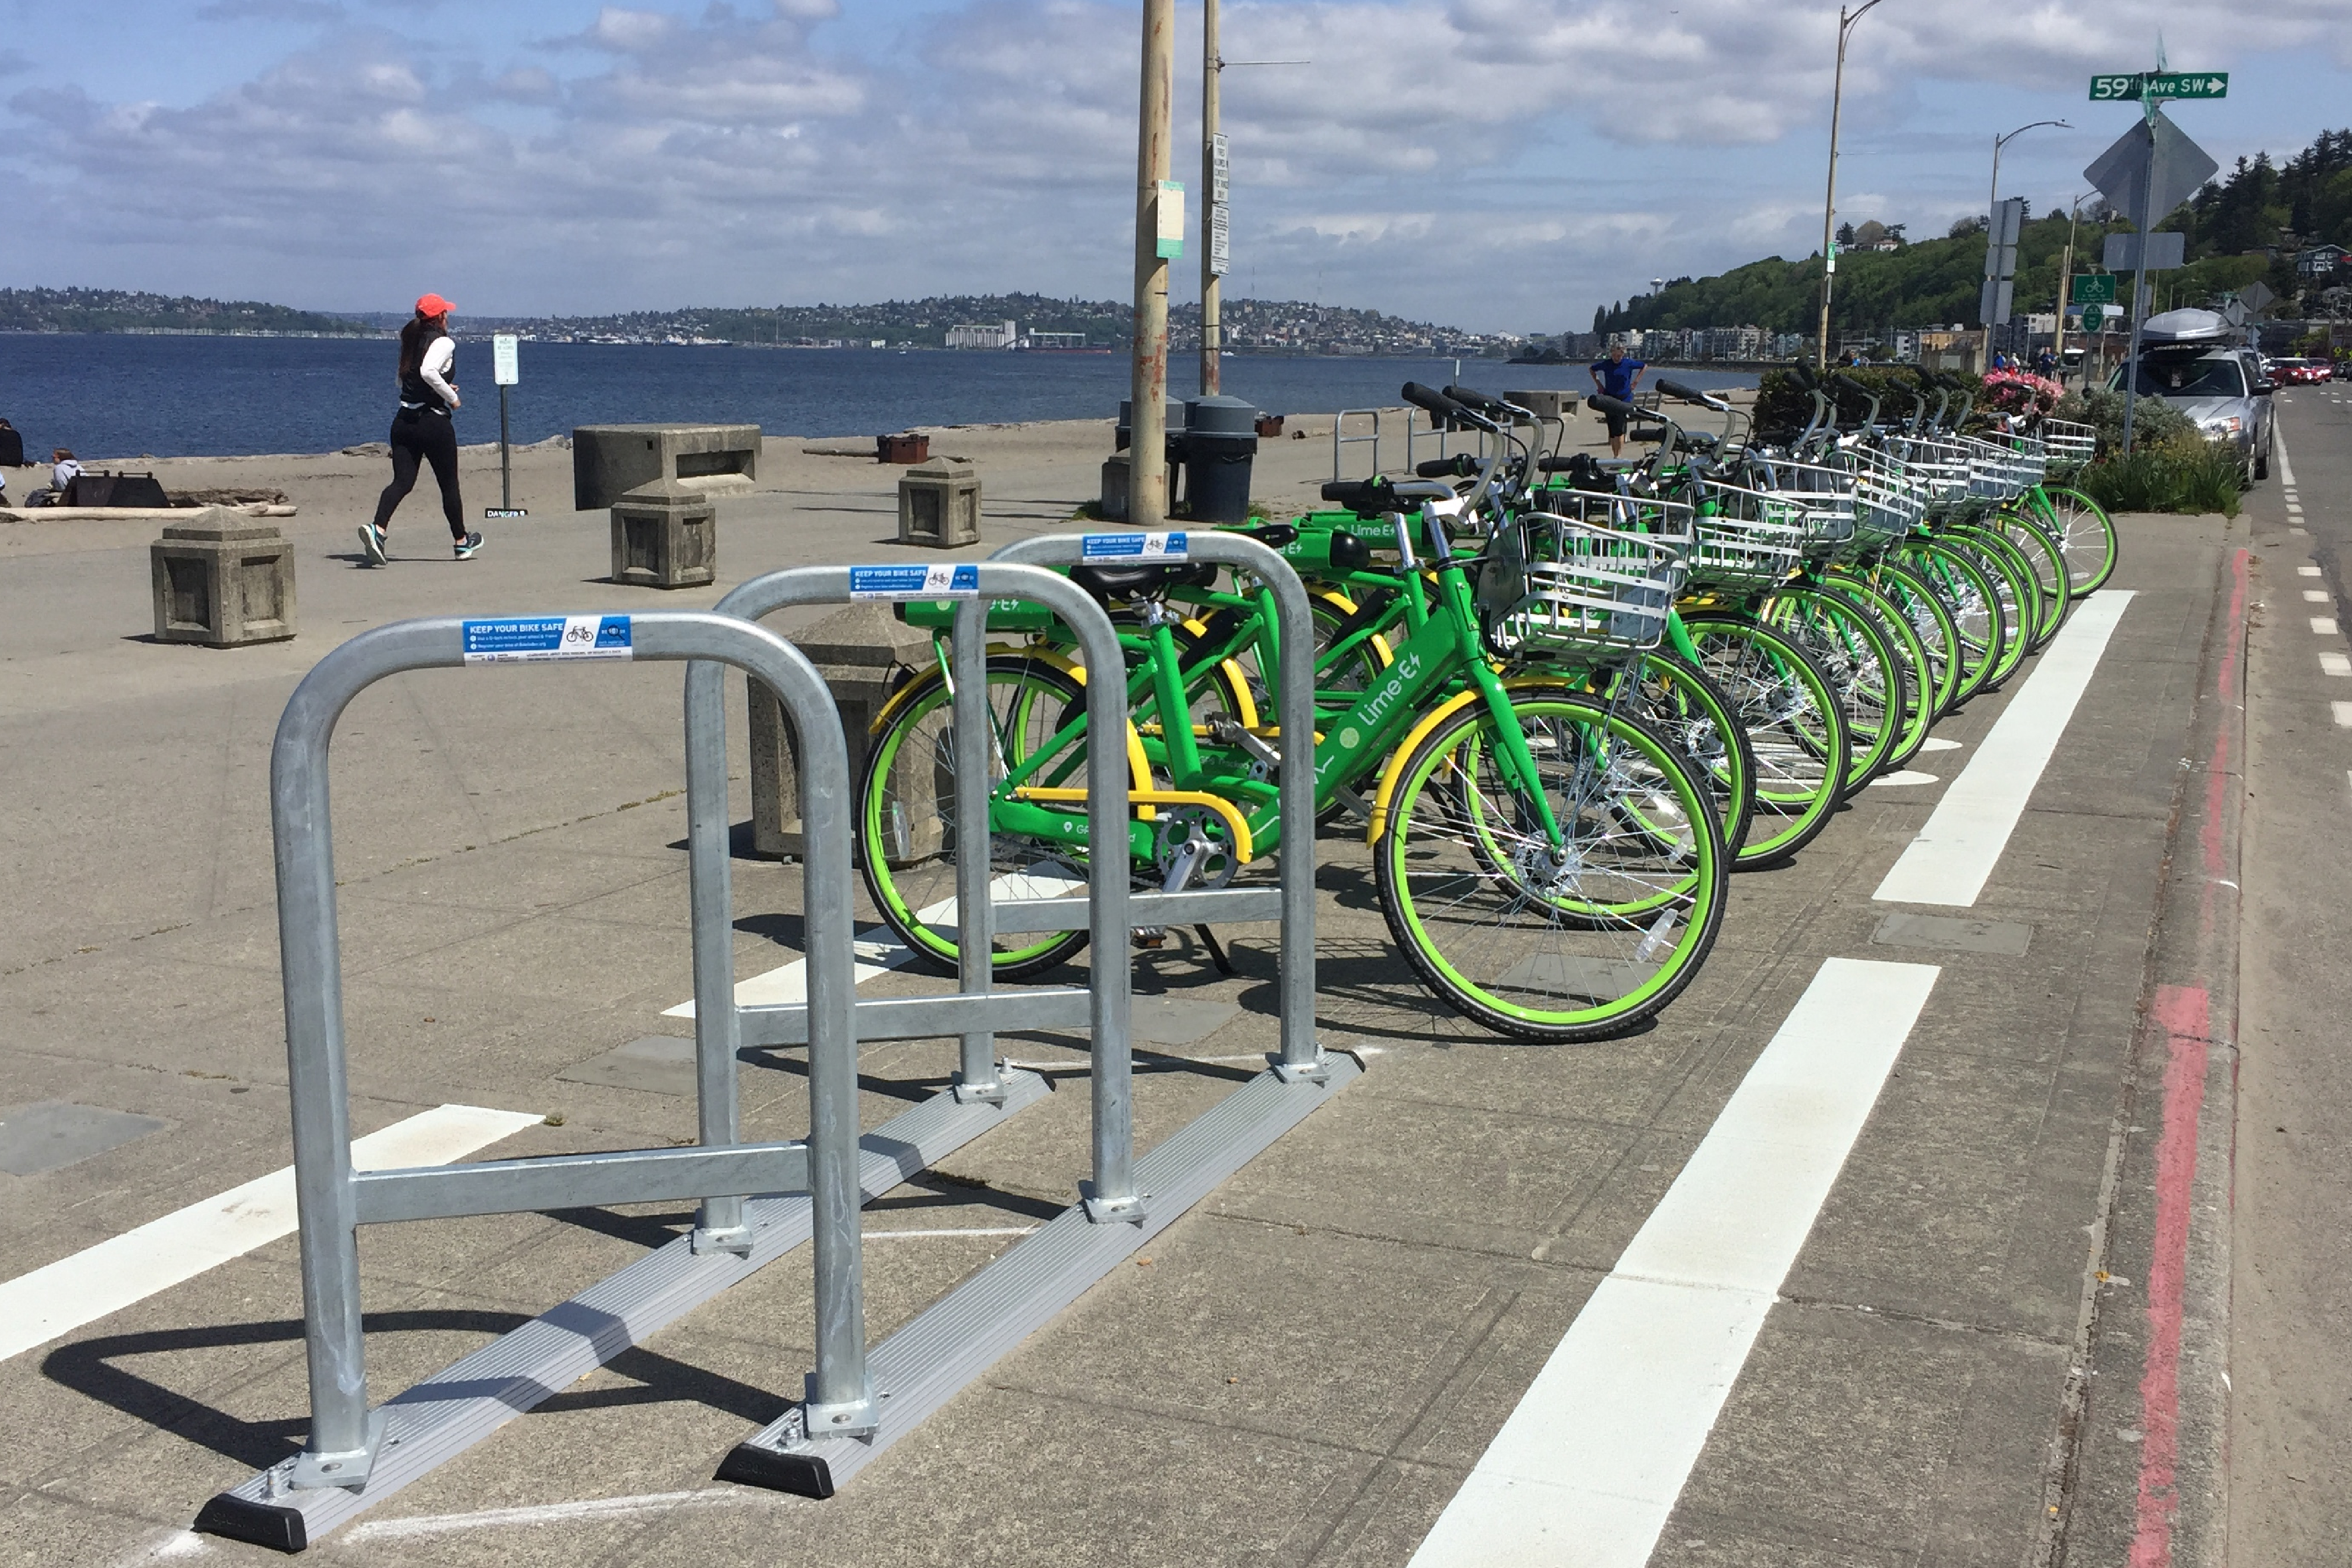 Bike share parking still an accessibility issue, but it’s getting